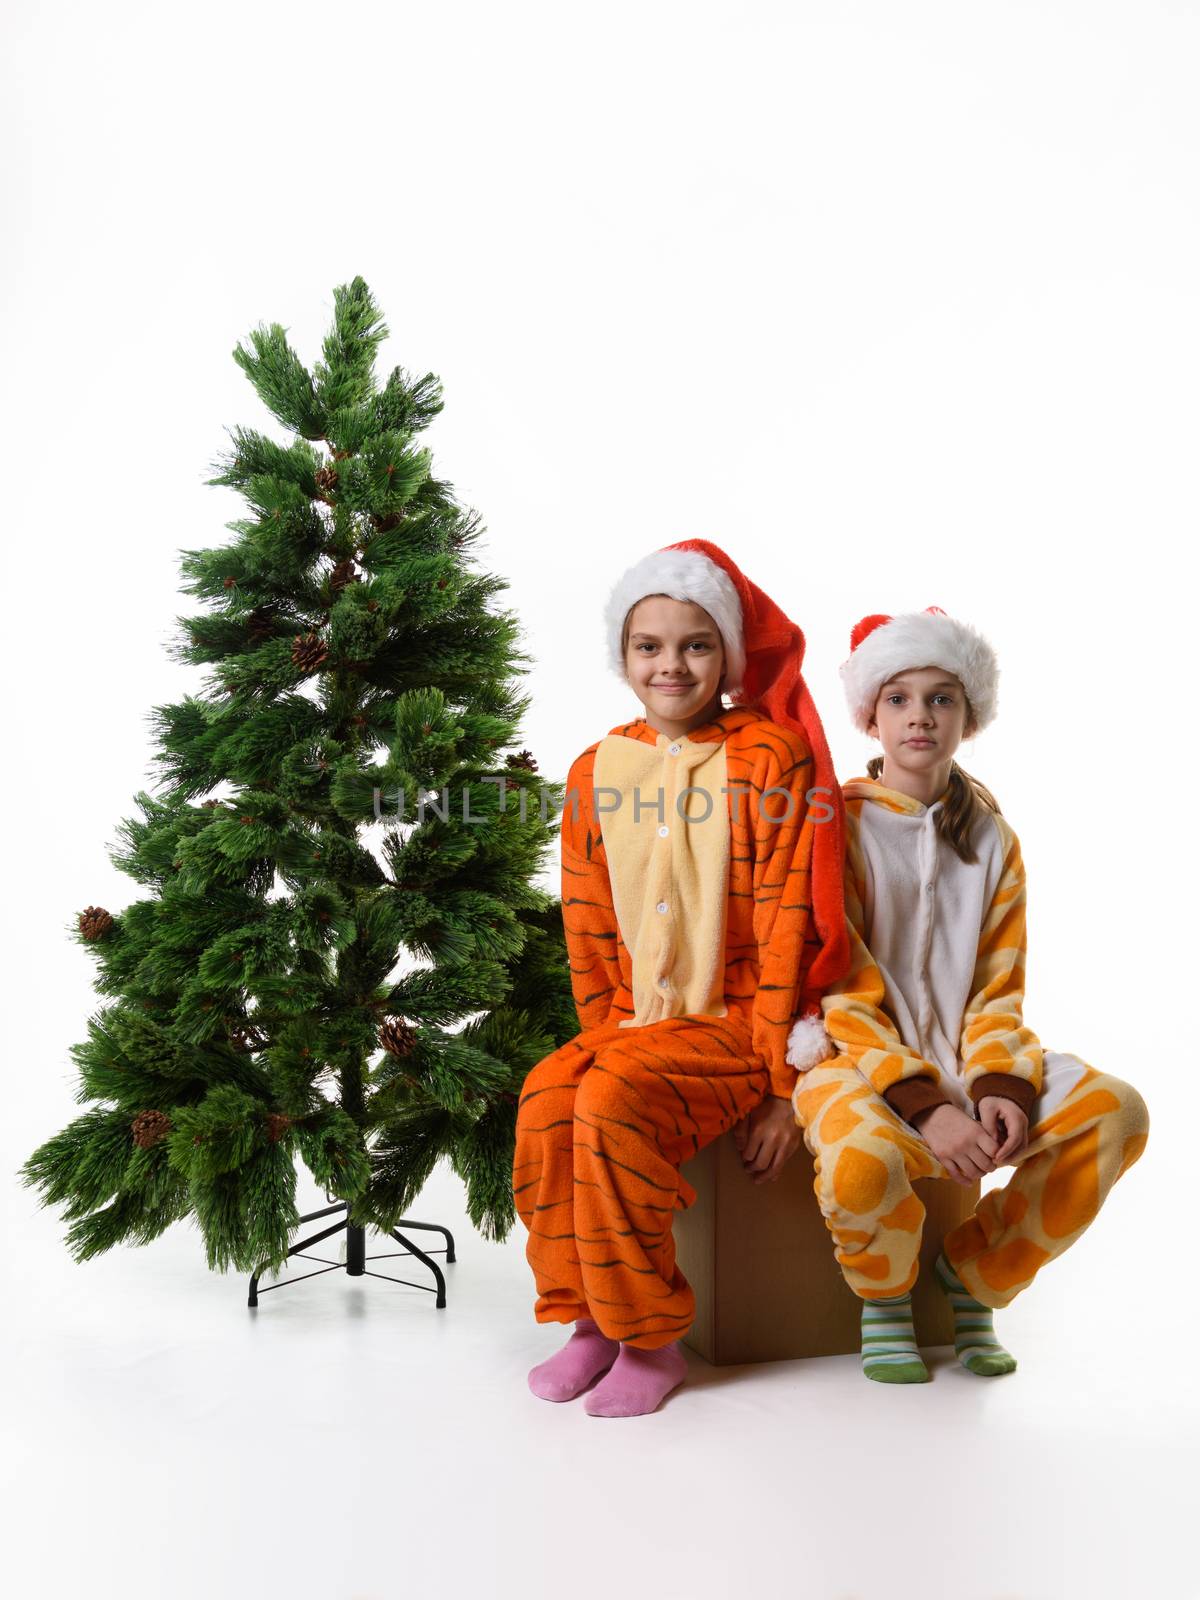 Two girls sitting on a box with toys near an artificial Christmas tree